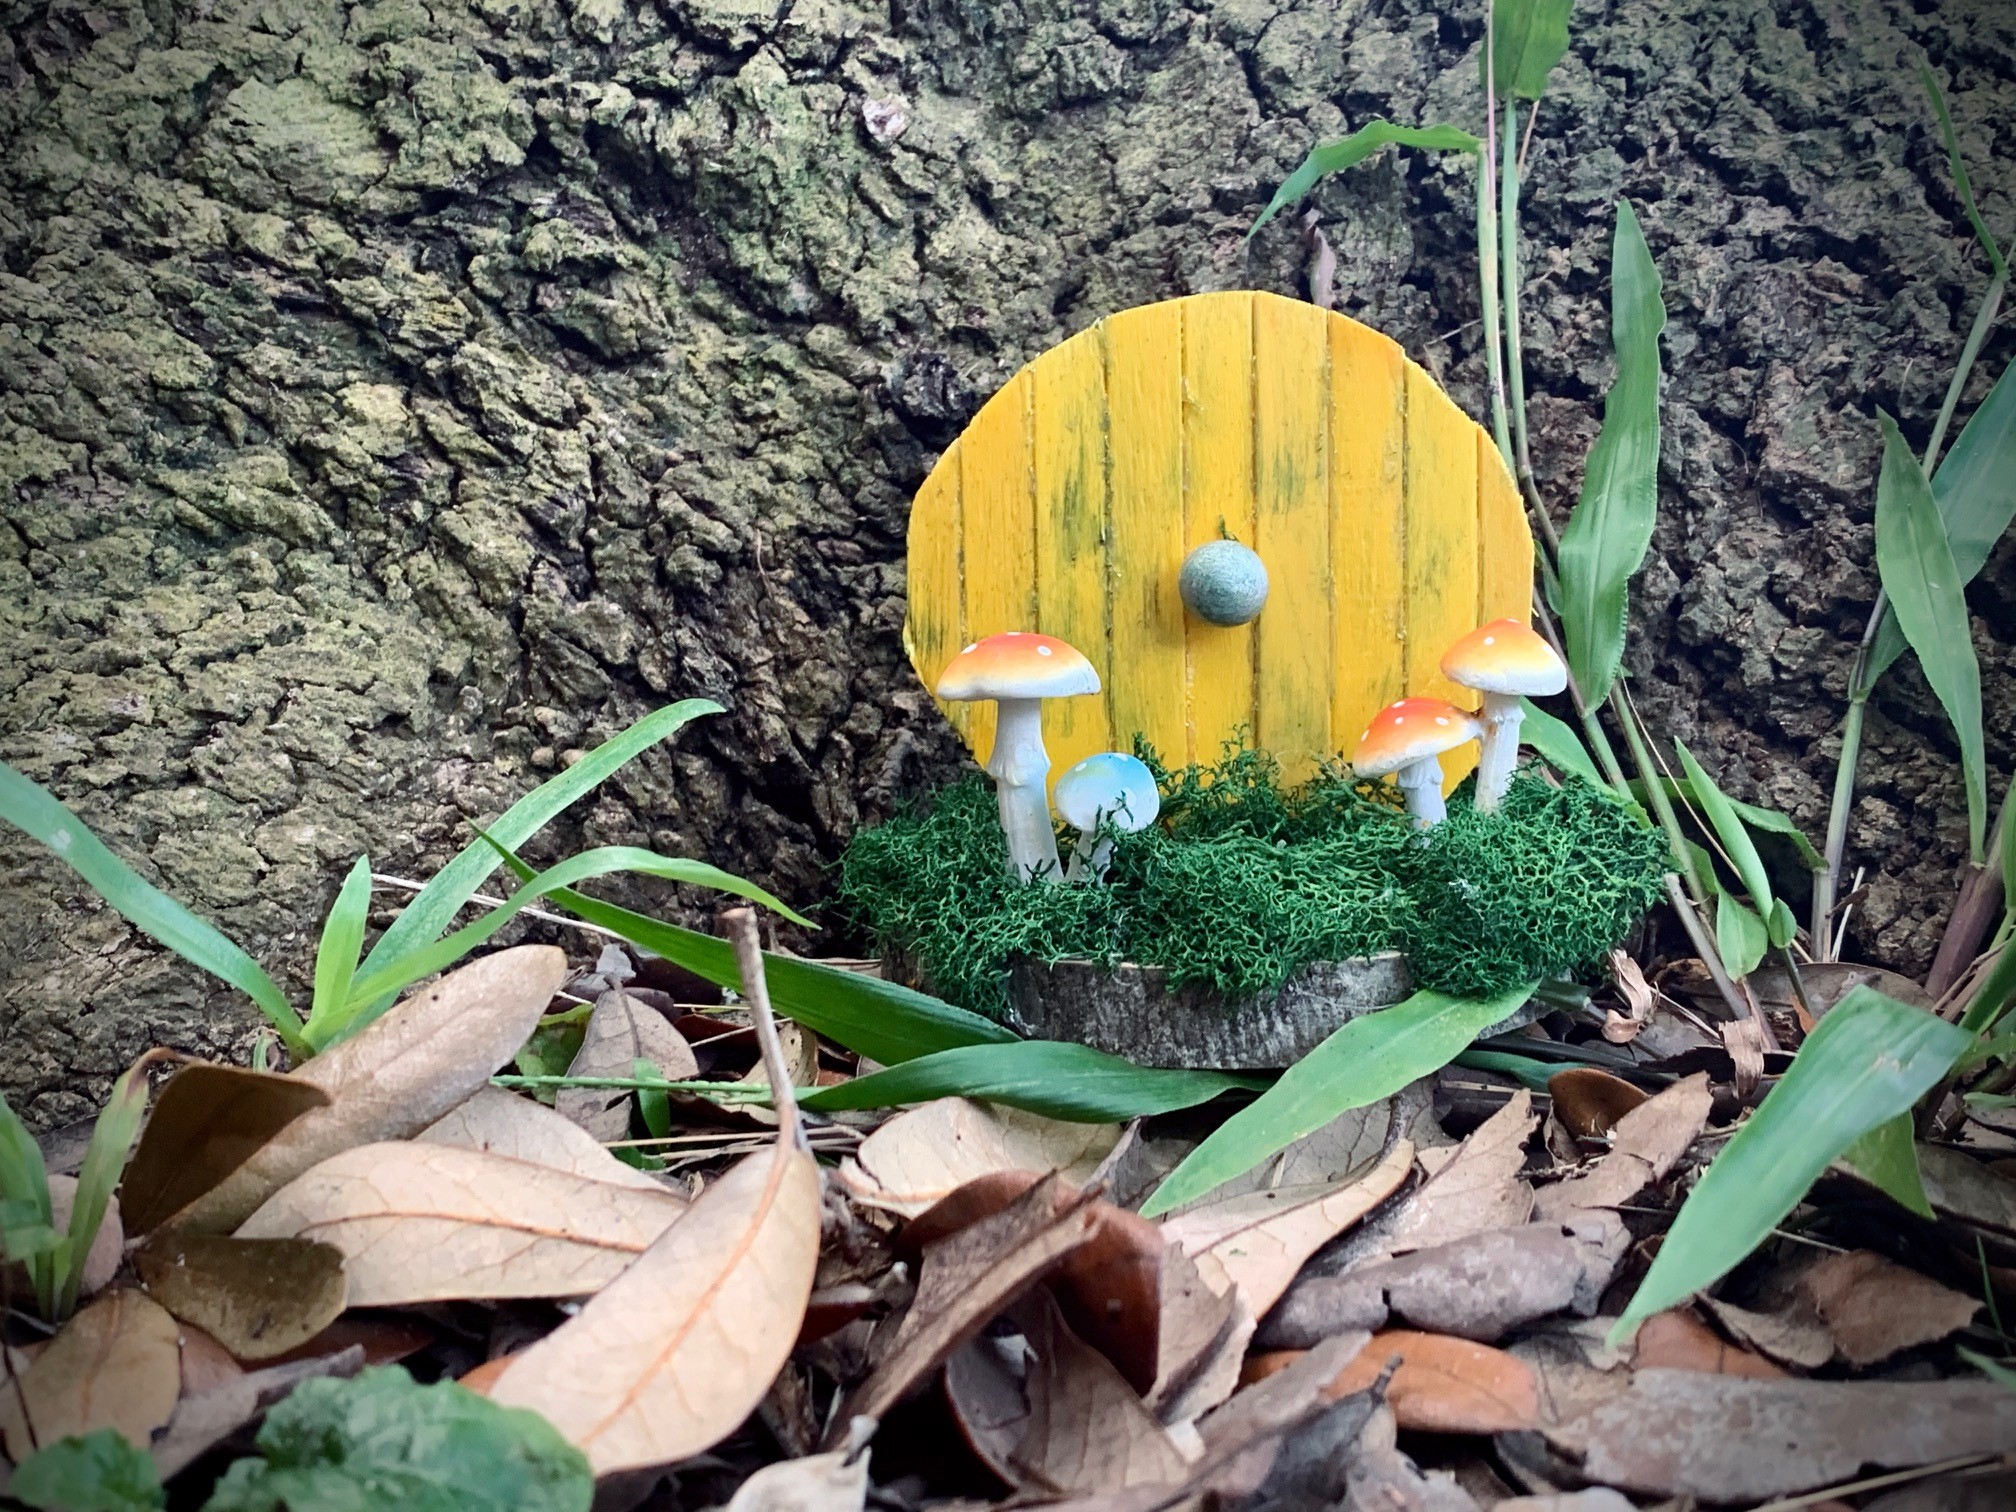 small, round yellow door leaning against tree trunk